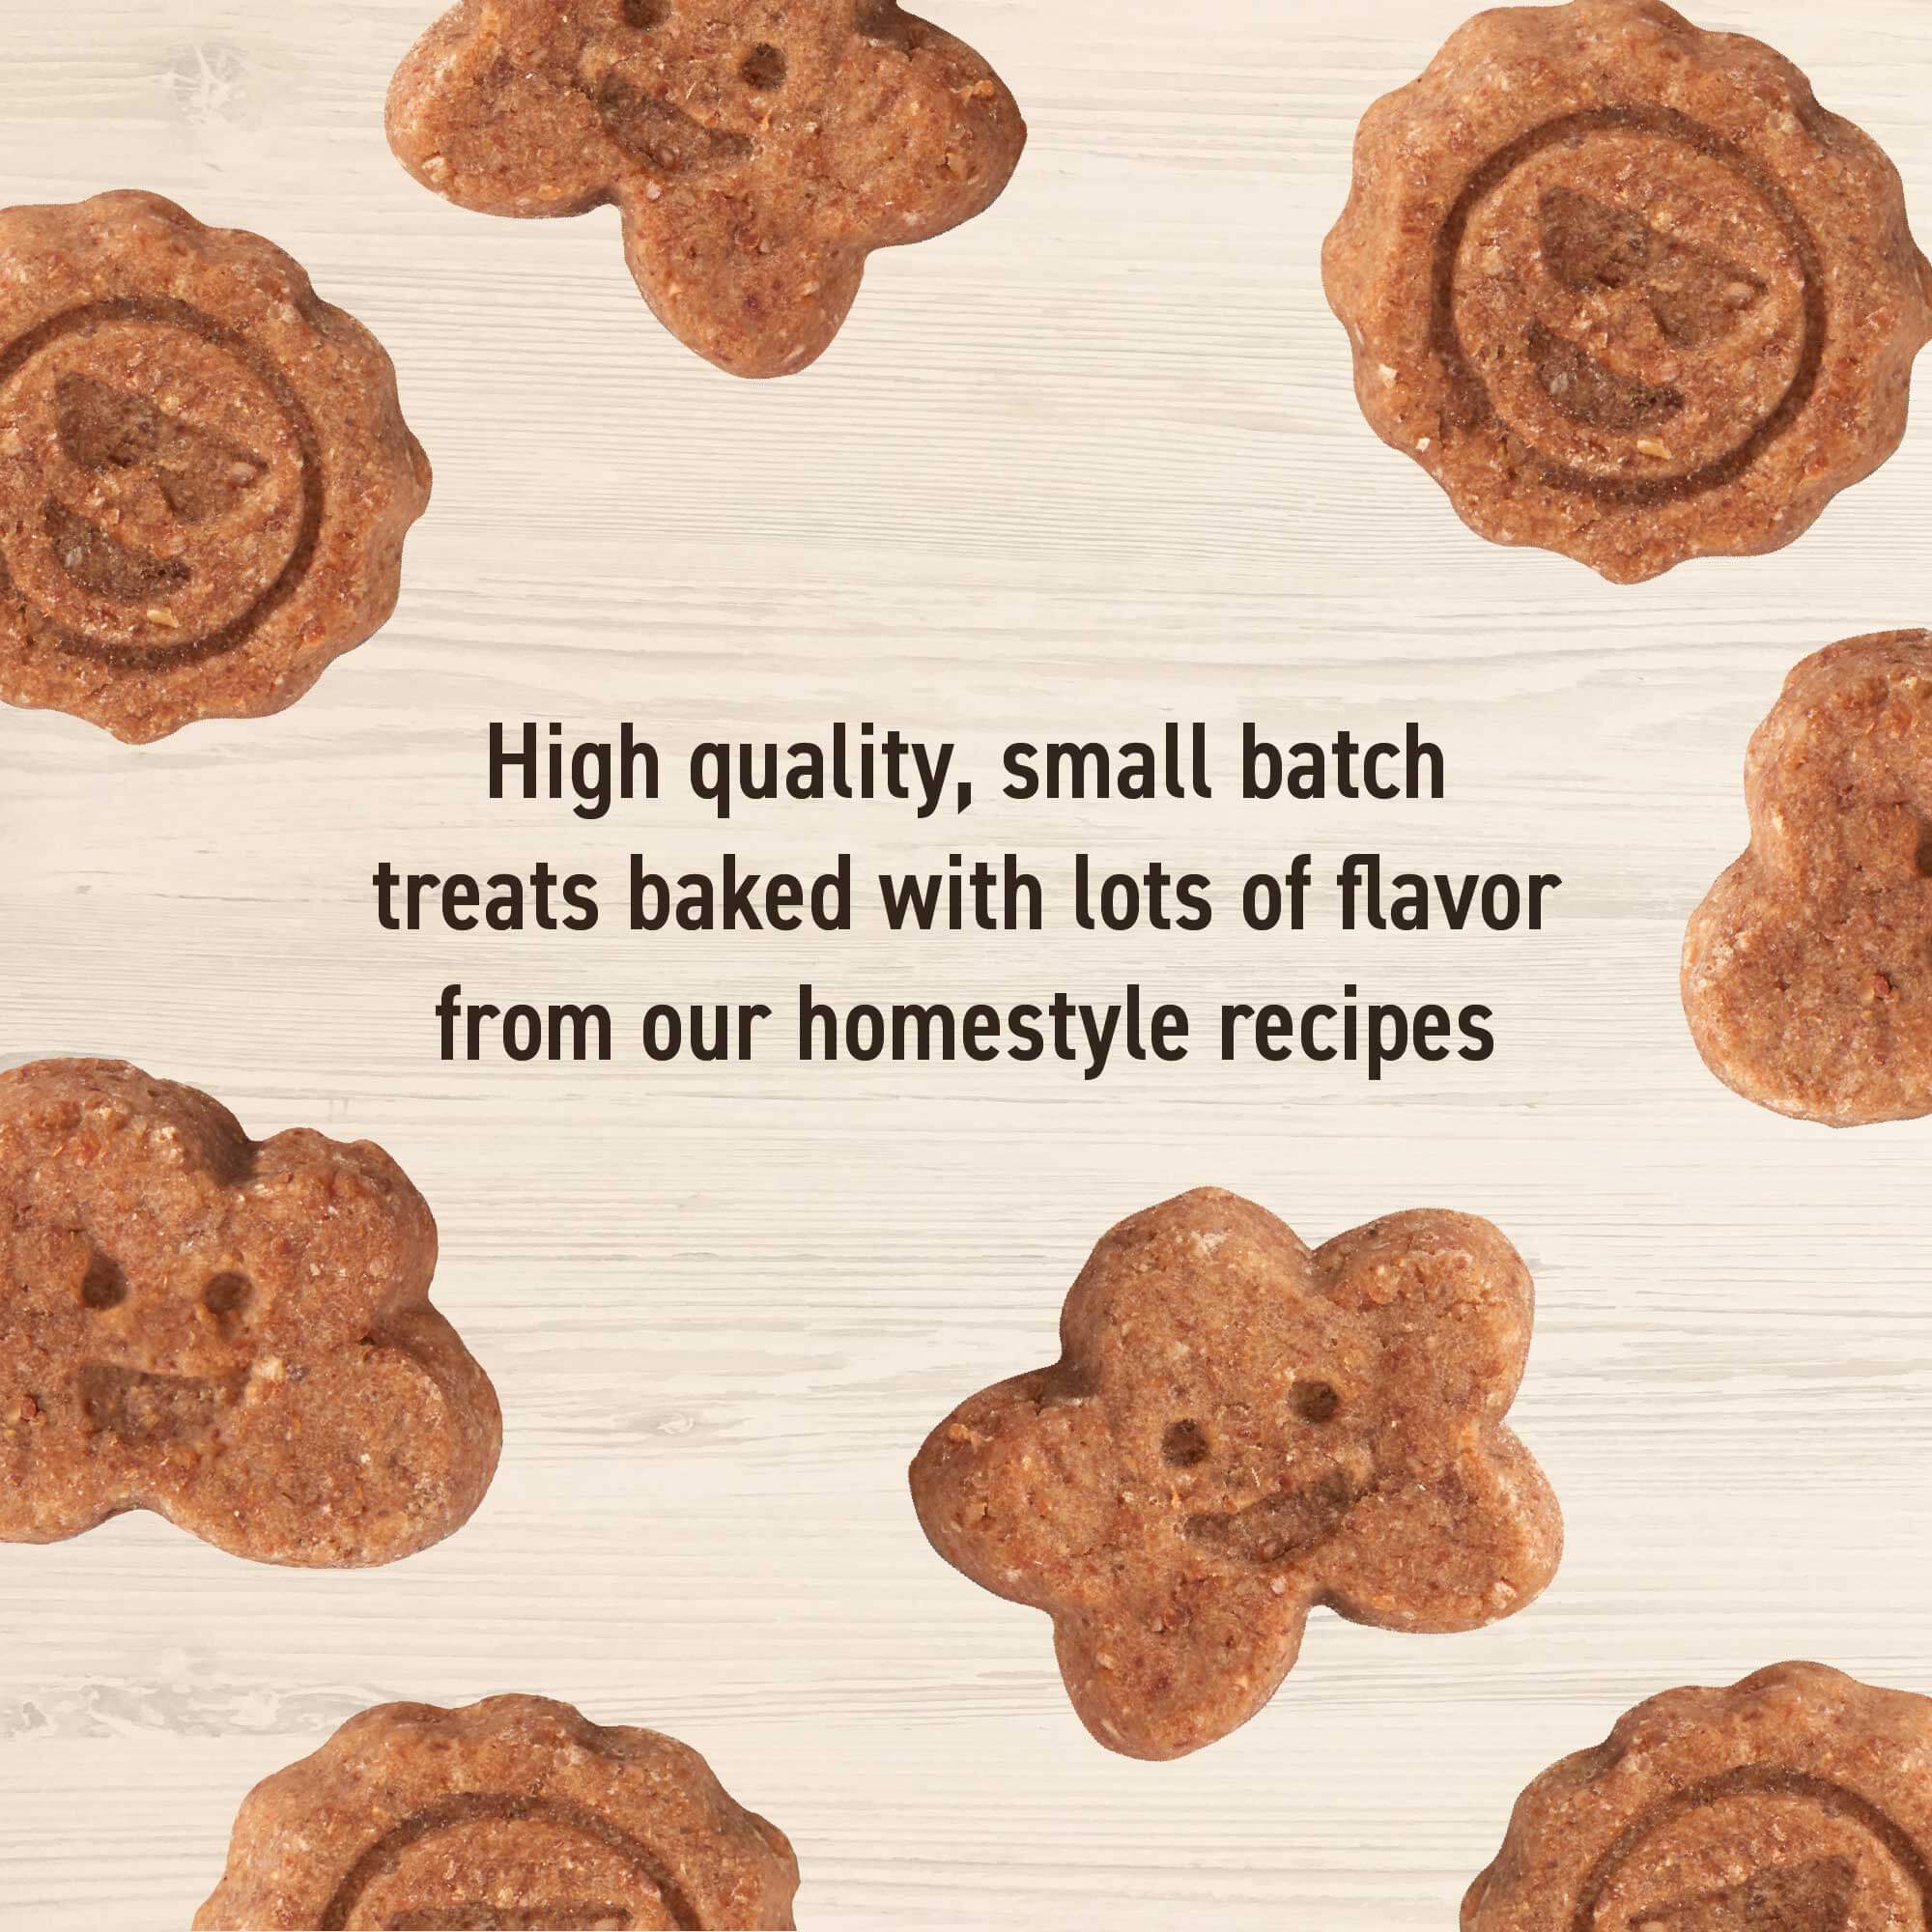 Cloud Star Wag More Bark Less Grain Free Soft & Chewy Dog Treats with Peanut Butter & Apples, 5oz